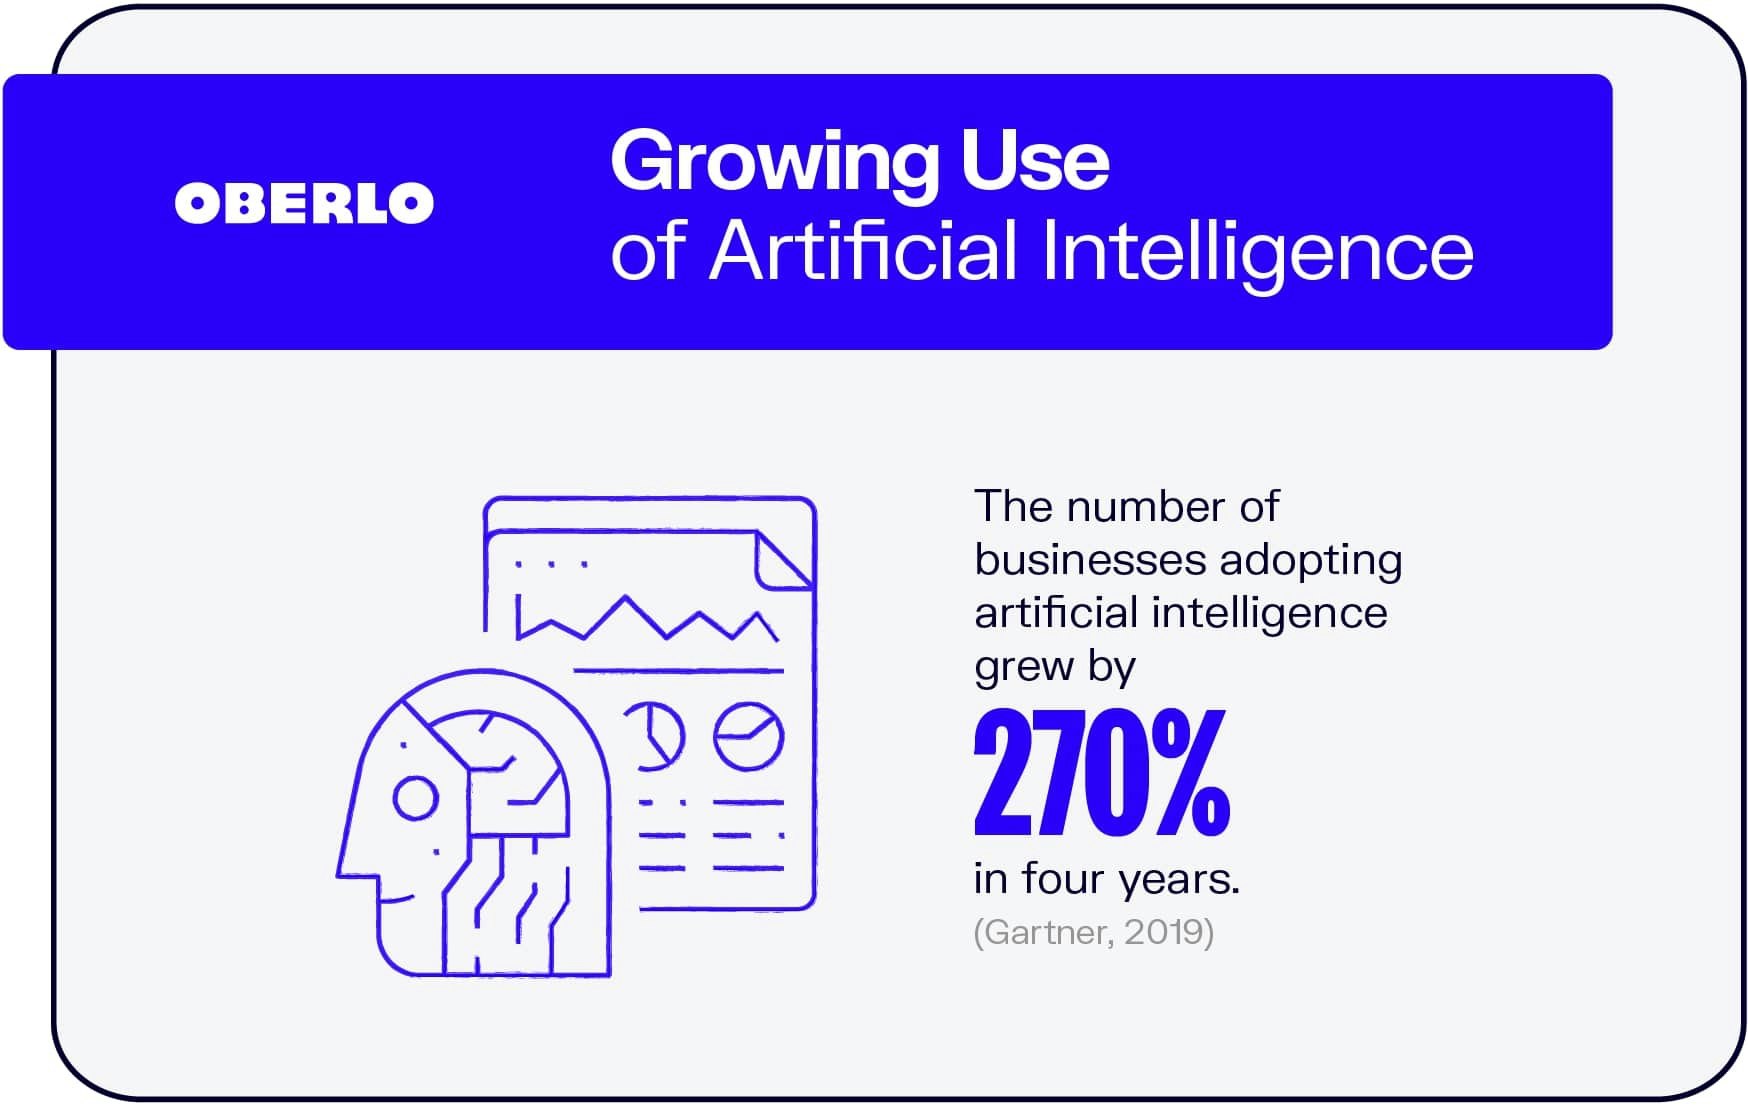 Growing Use of Artificial Intelligence